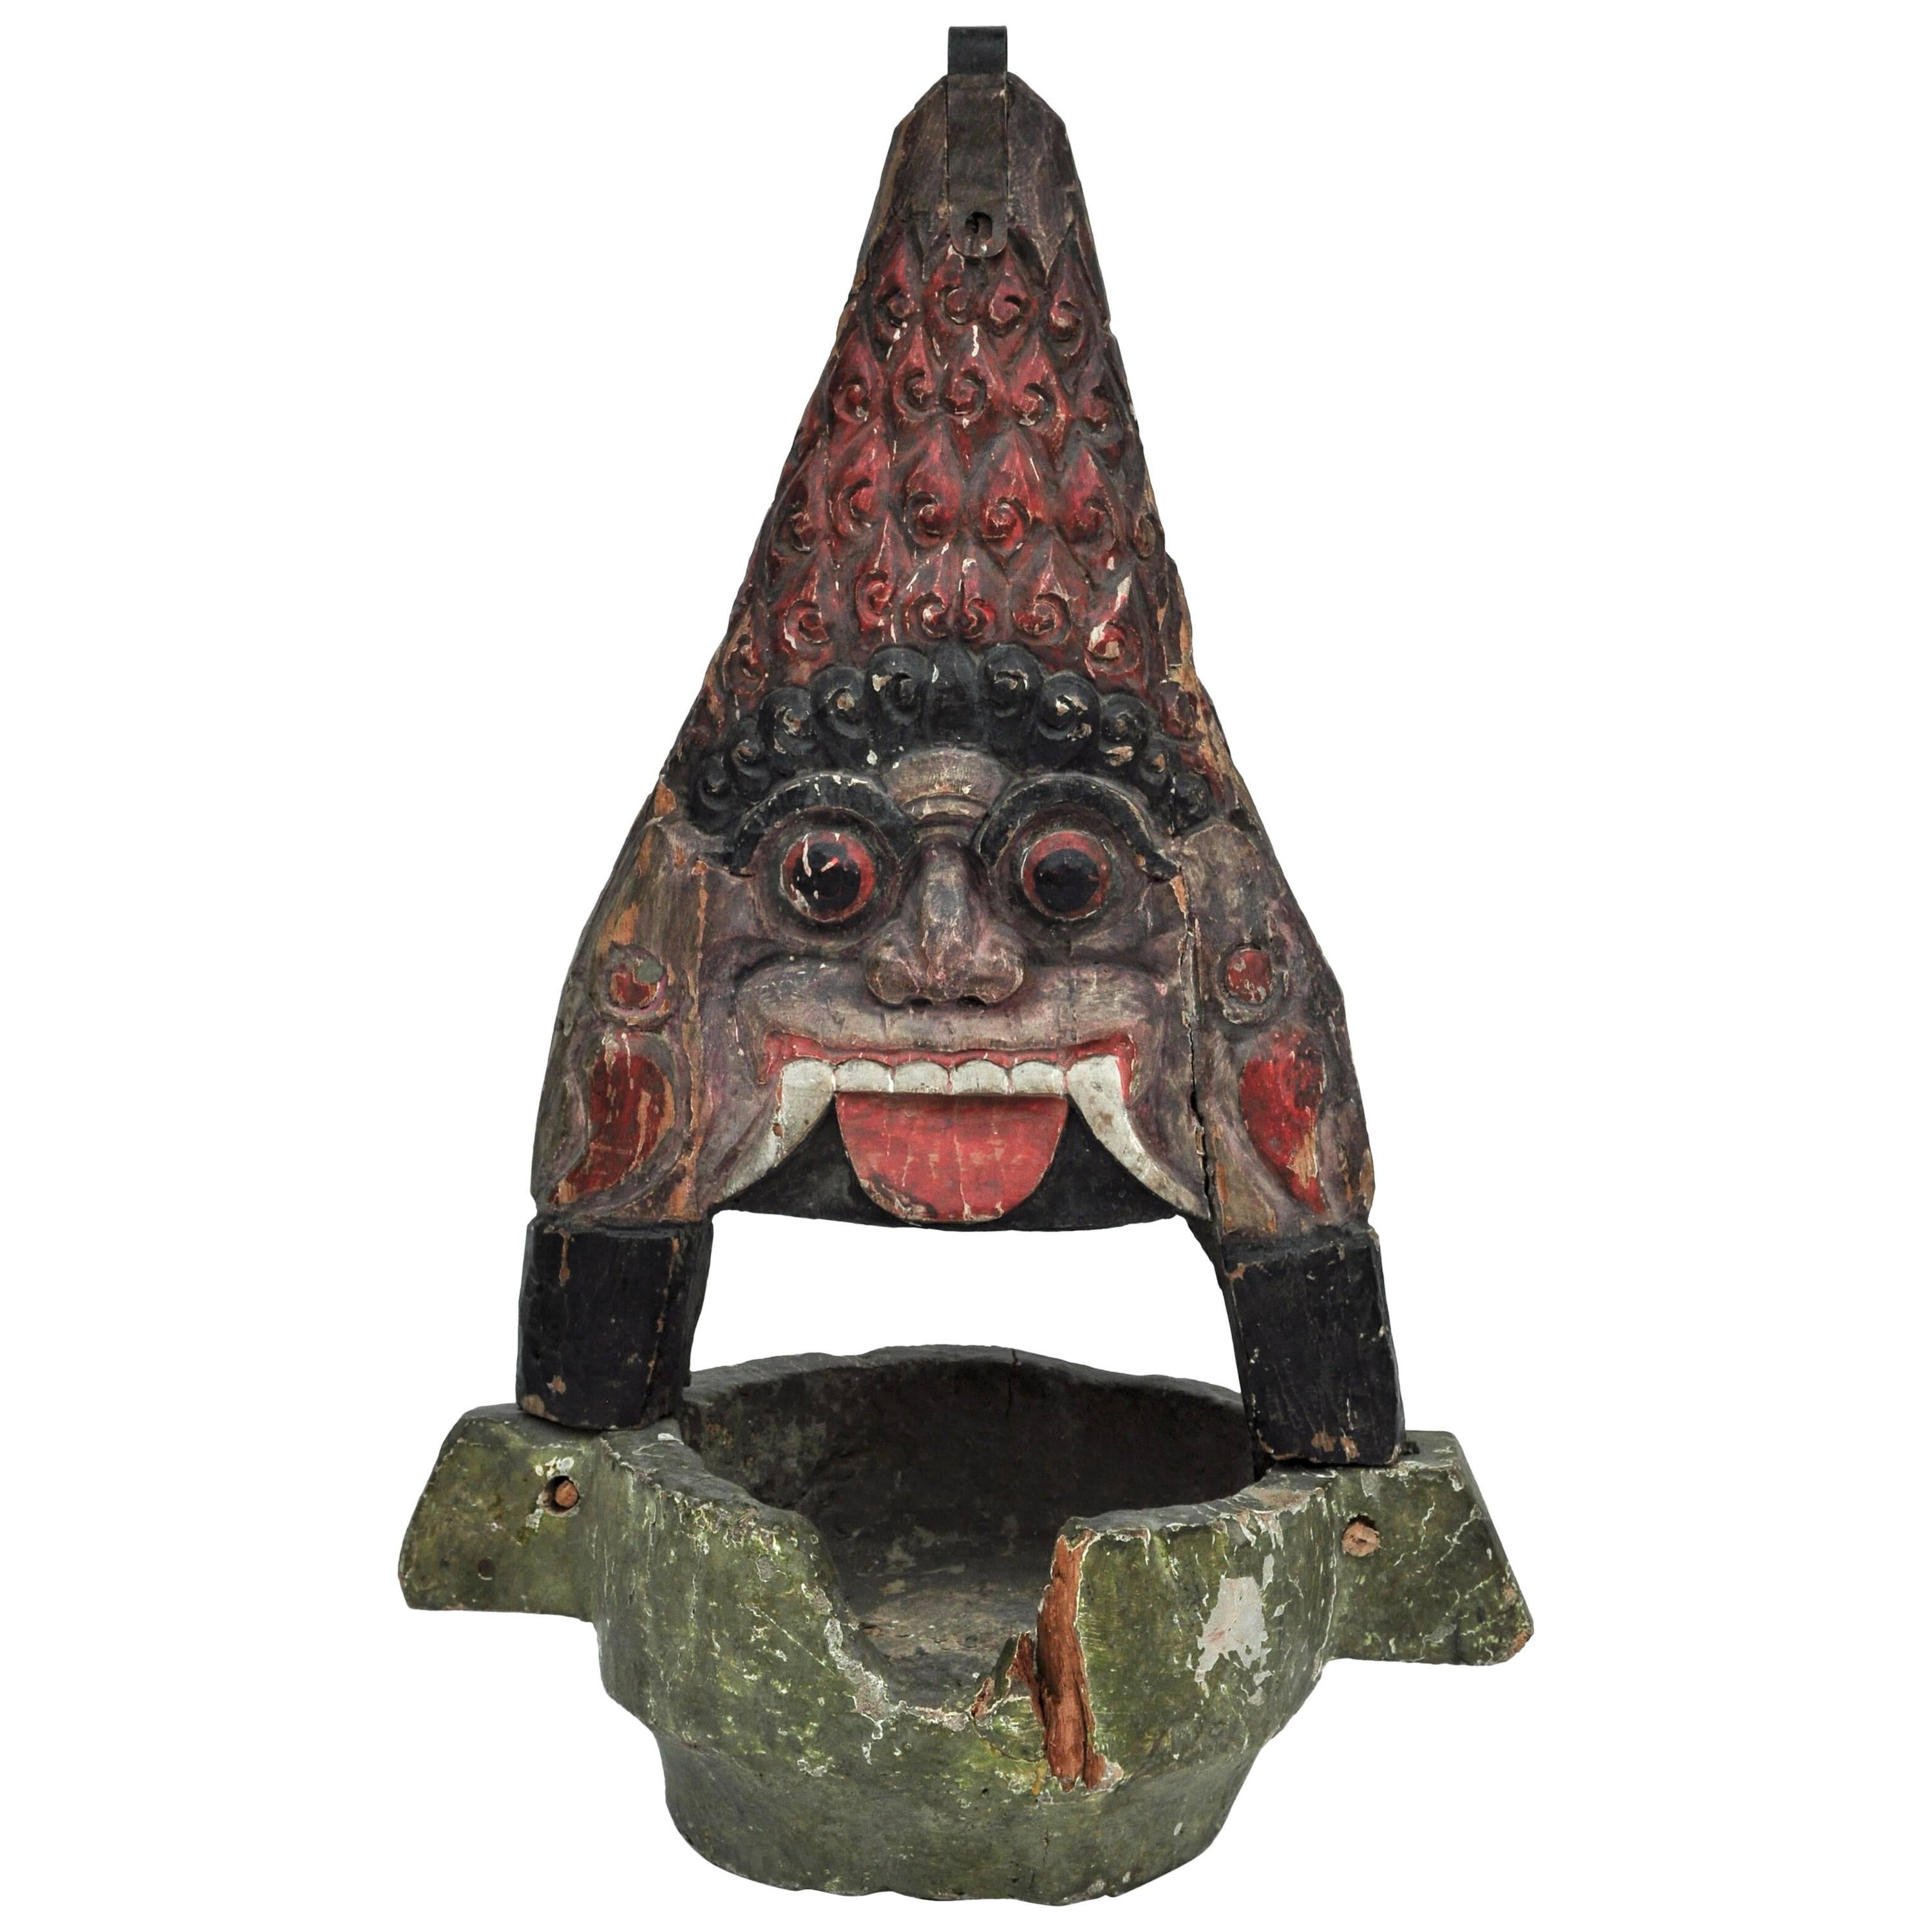 Vintage Lamp Holder, Bali, Wayang Puppet Theatre, Early to Mid-20th Century